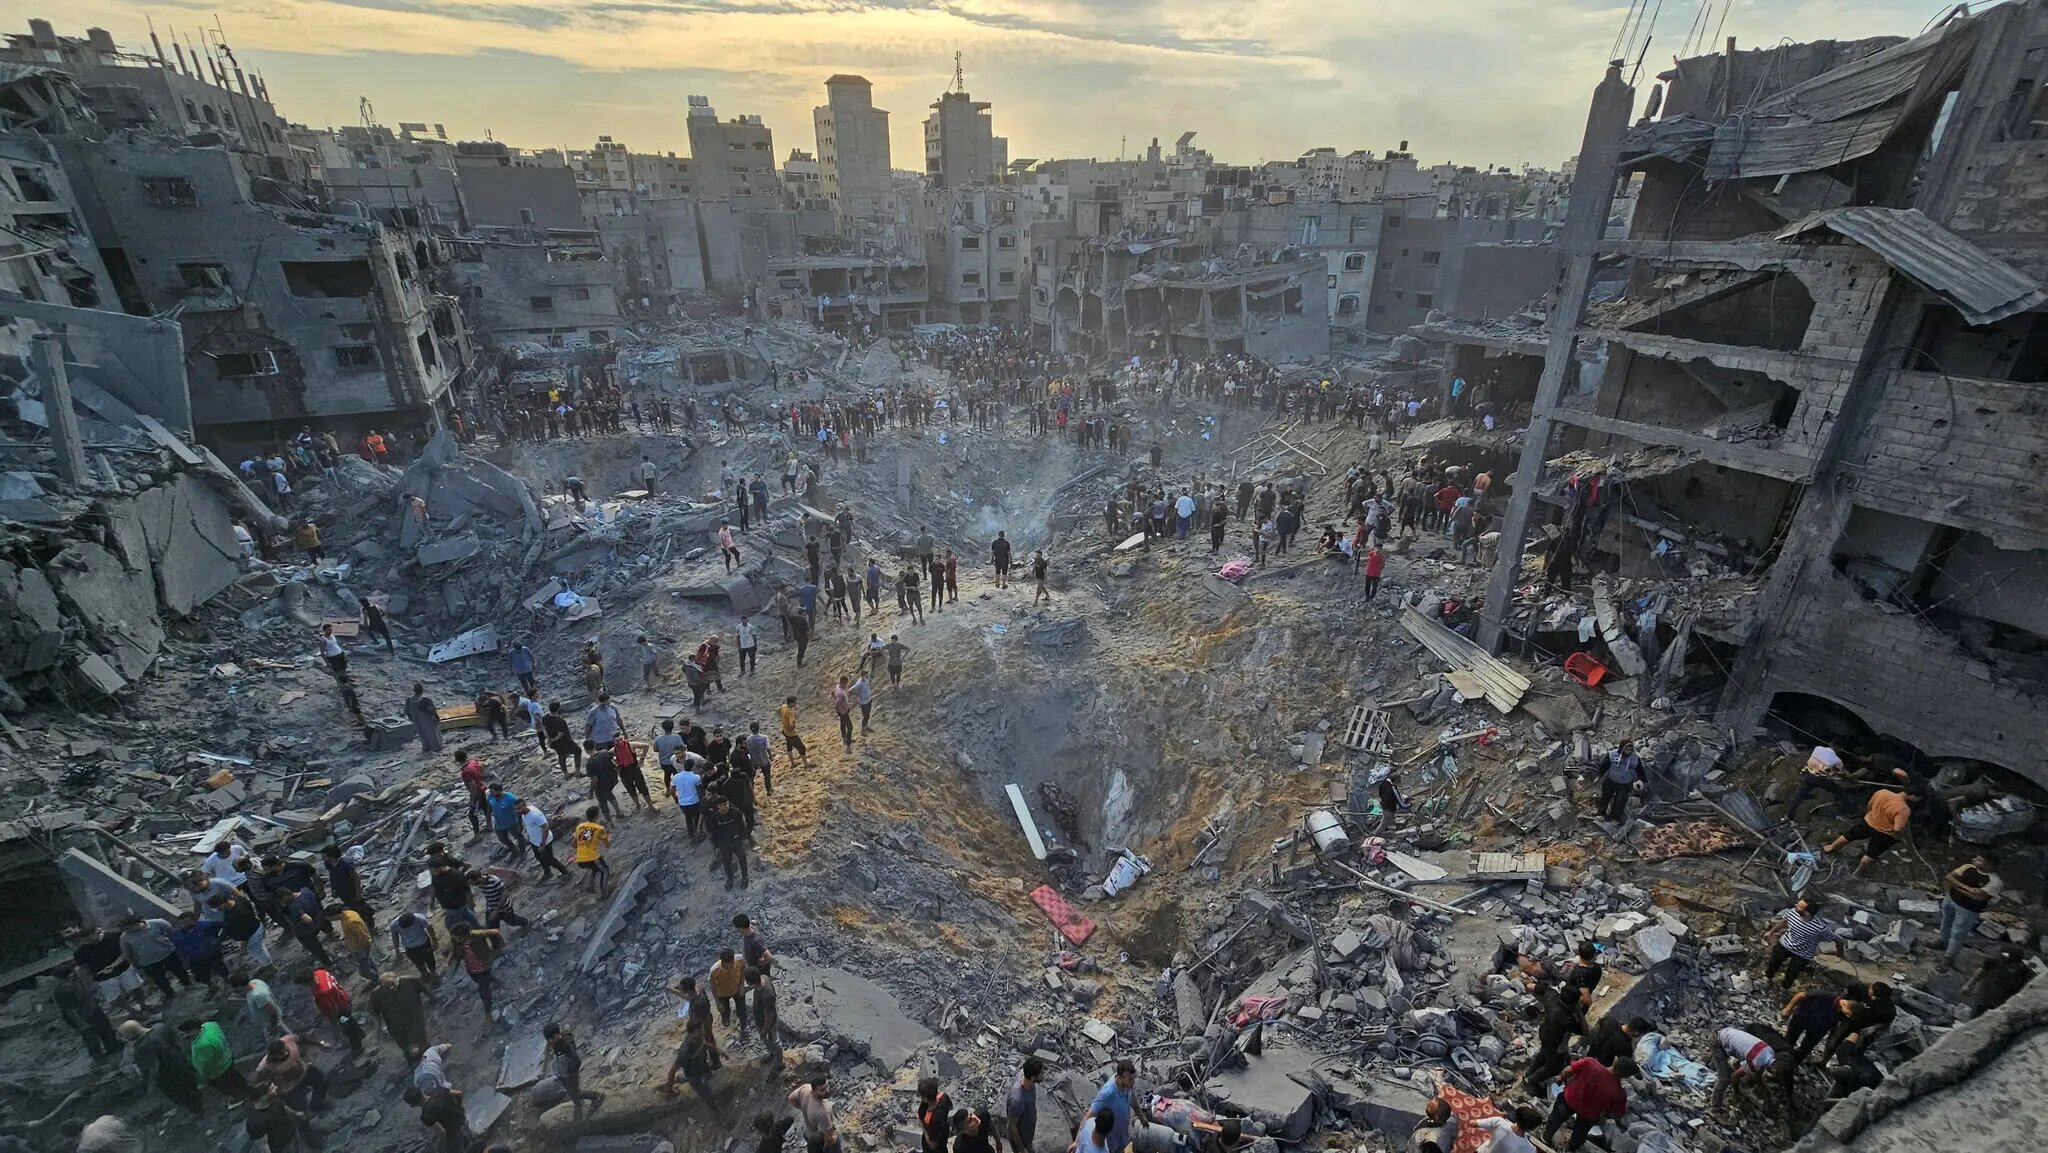 Gaza Refugee Camp Hit By Second Israeli Airstrike In Two Days, Escalating Outcry